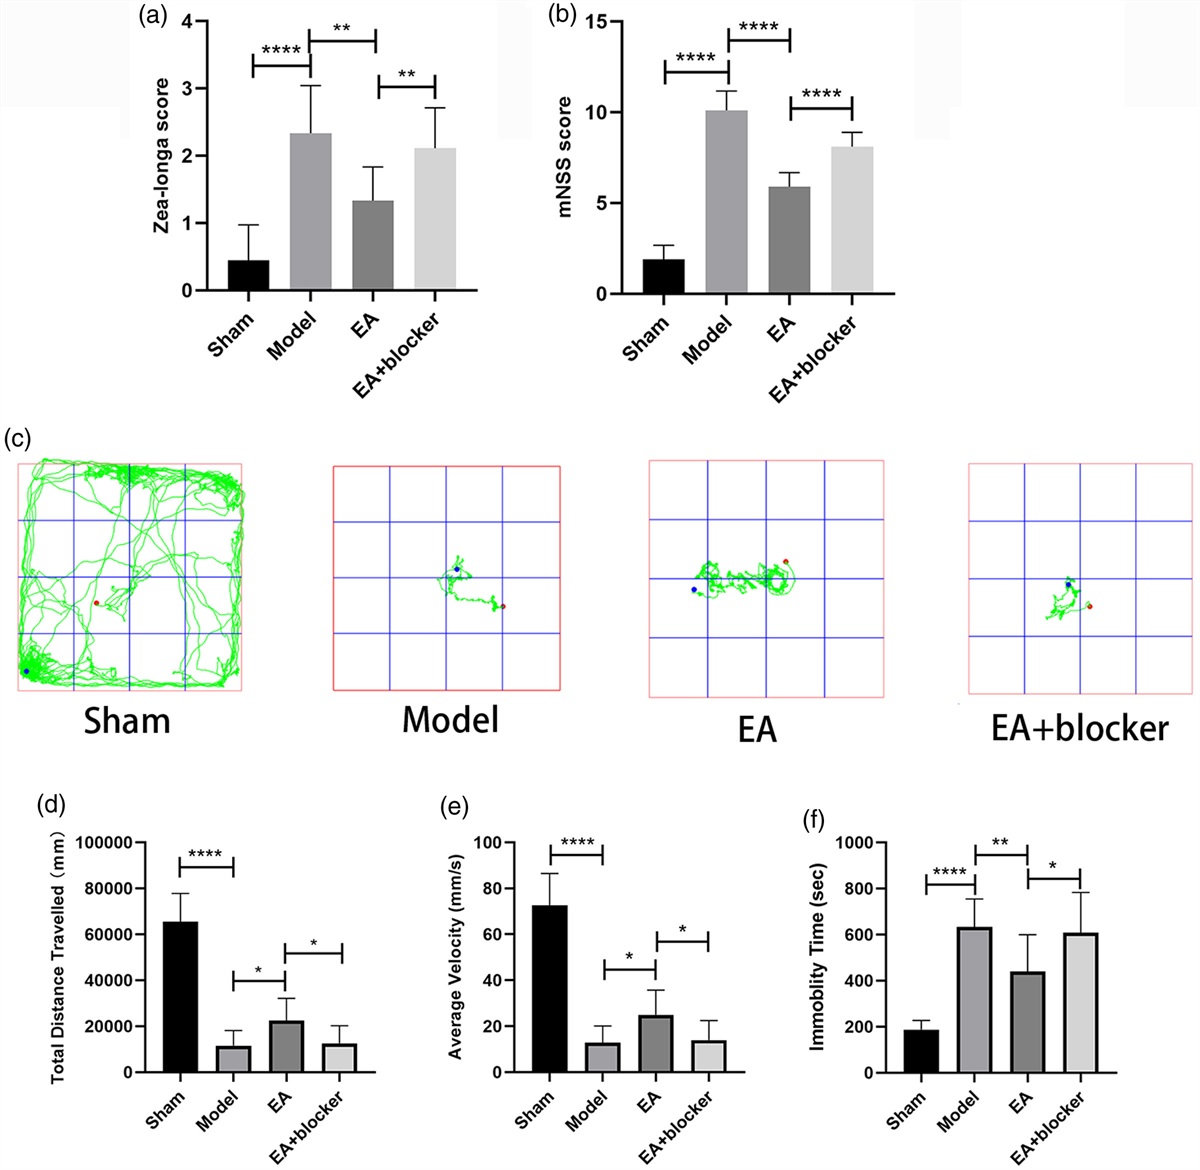 Electroacupuncture reduces oxidative stress response and improves secondary injury of intracerebral hemorrhage in rats by activating the peroxisome proliferator-activated receptor-γ/nuclear factor erythroid2-related factor 2/γ-glutamylcysteine synthetase pathway